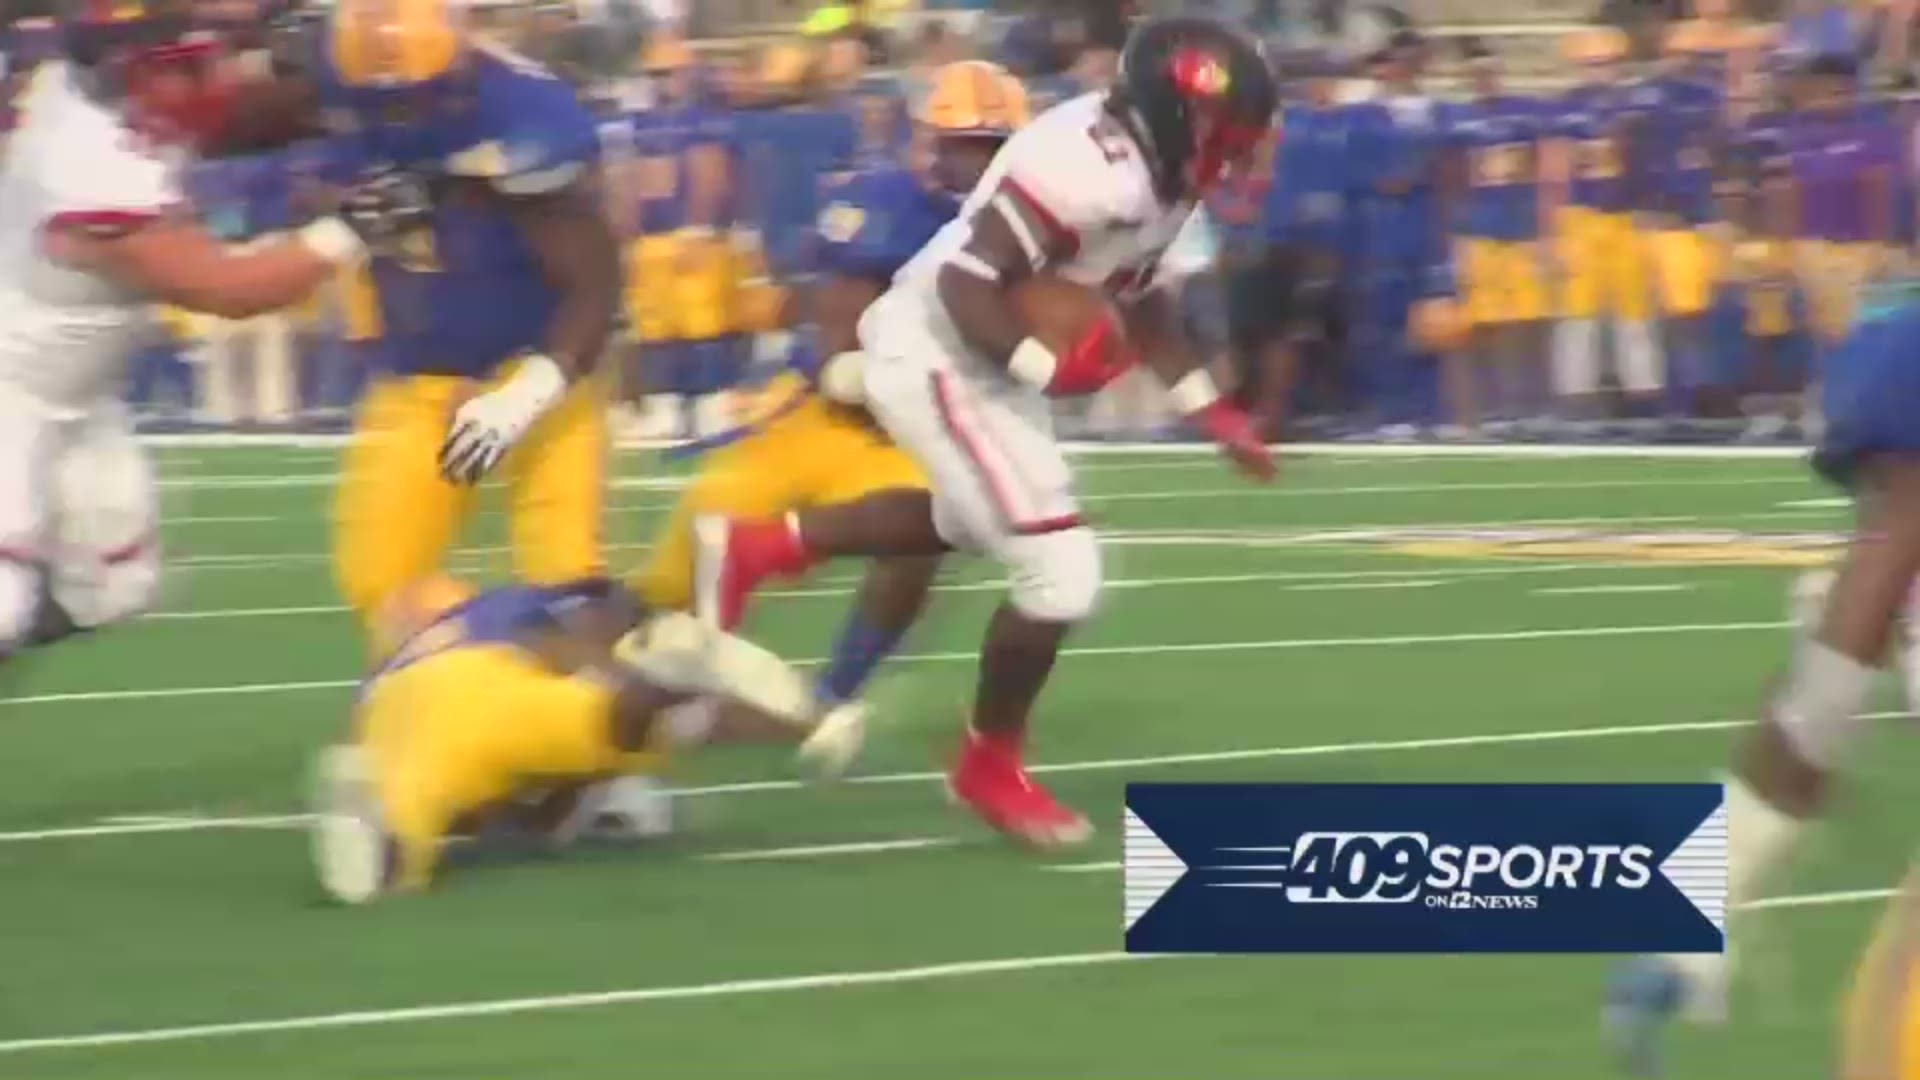 Here are all of the big offensive plays from last Saturday night in Lake Charles.